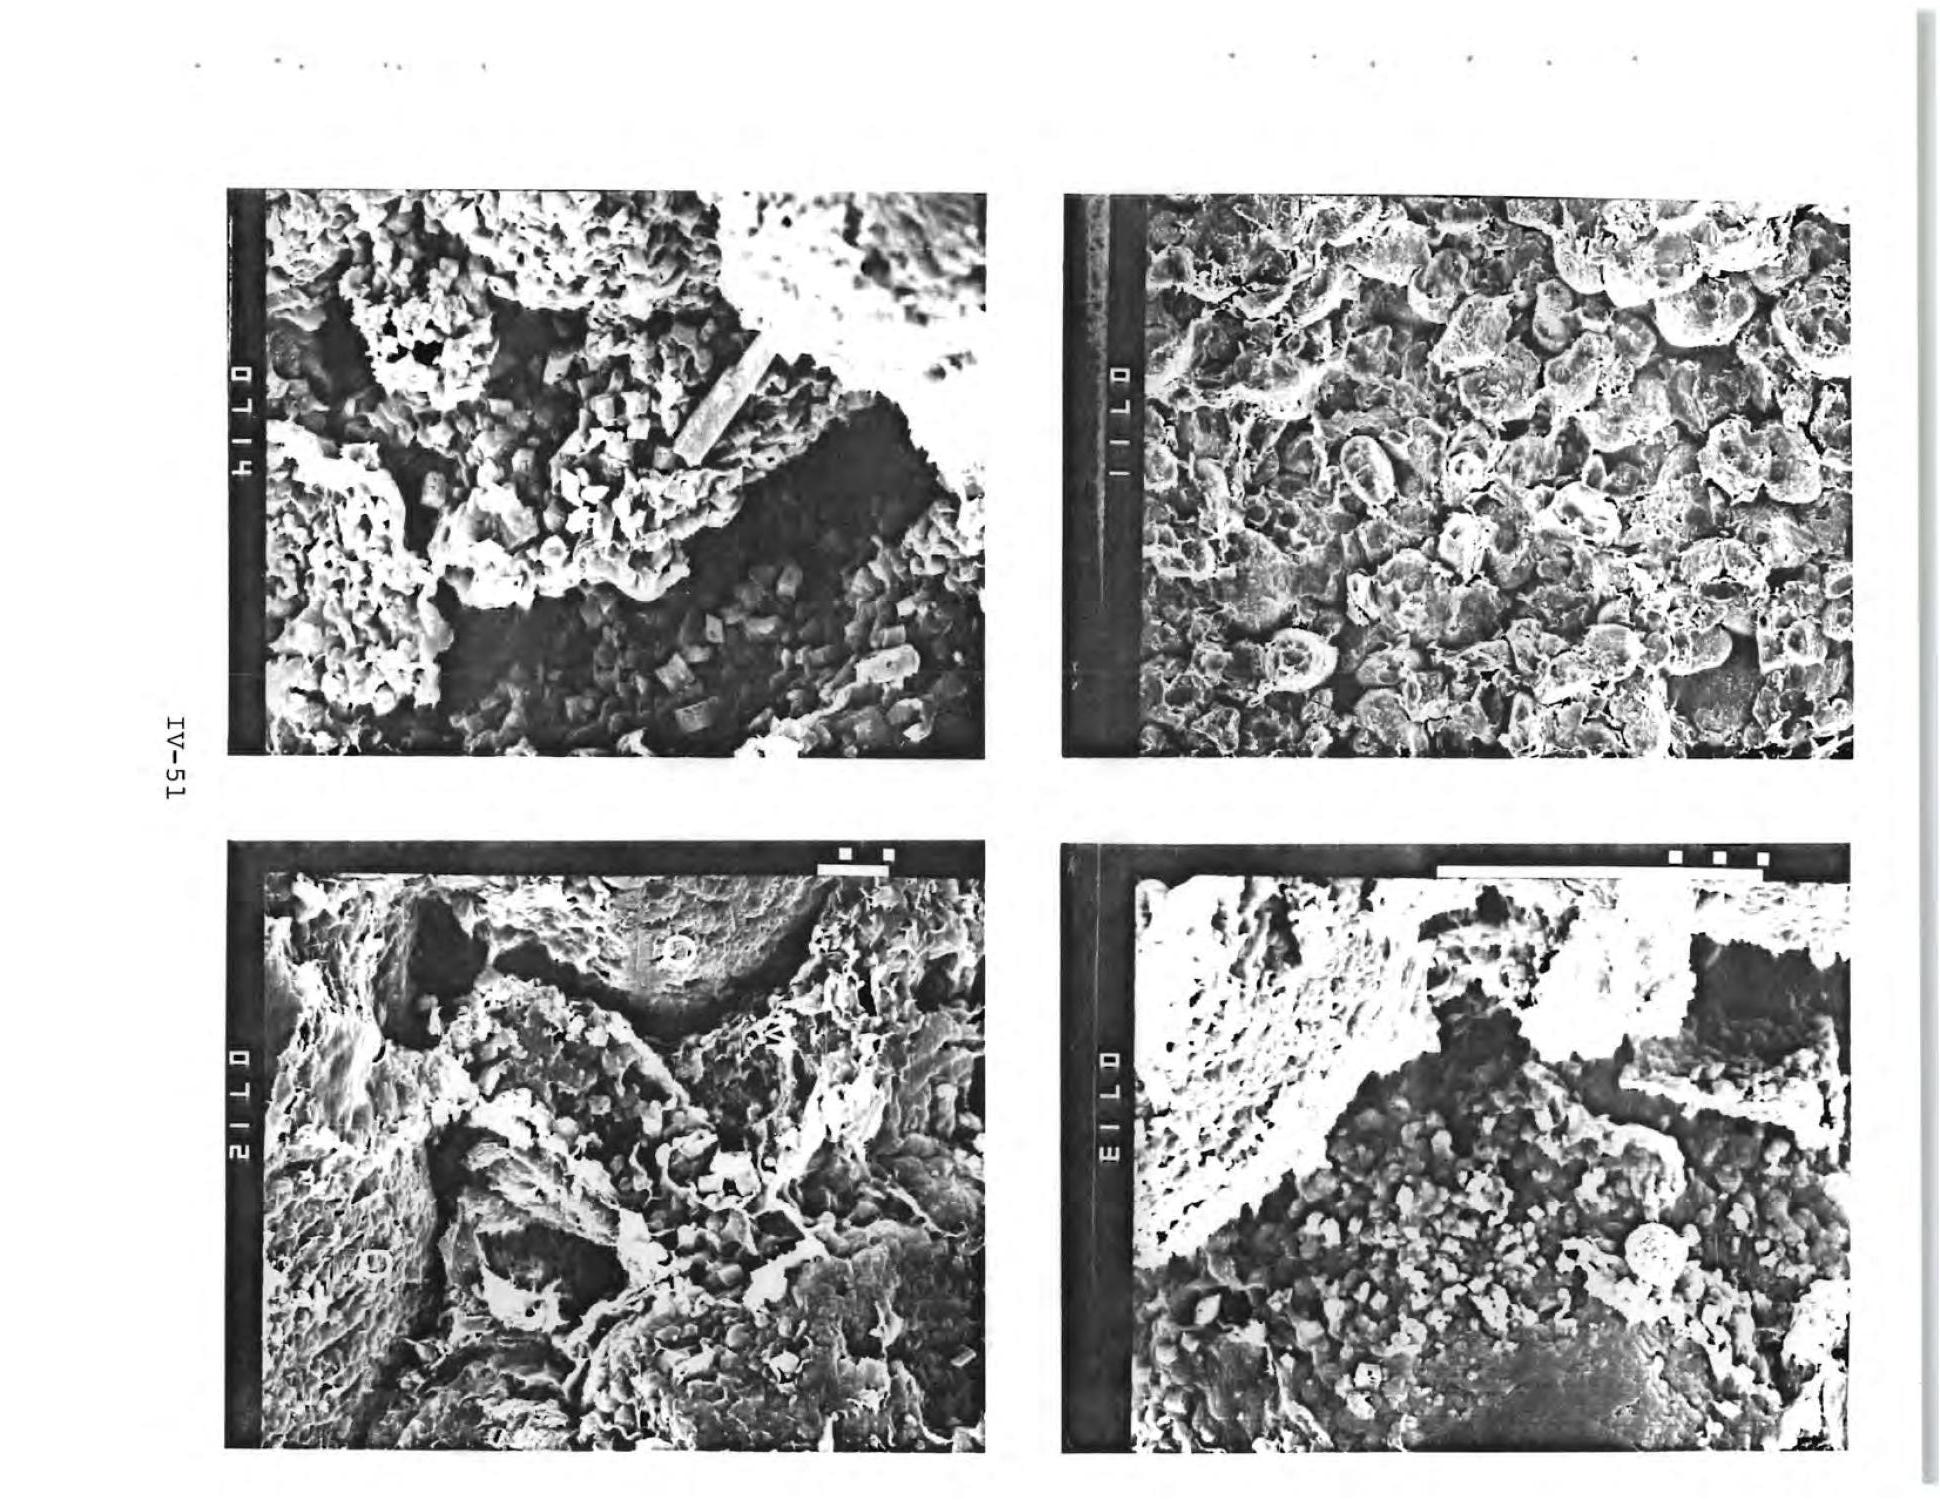 Pre-test geological and geochemical evaluation of the Caprock, St. Peter Sandstone and formation fluids, Yakley Field, Pike County, Illinois
                                                
                                                    [Sequence #]: 191 of 275
                                                